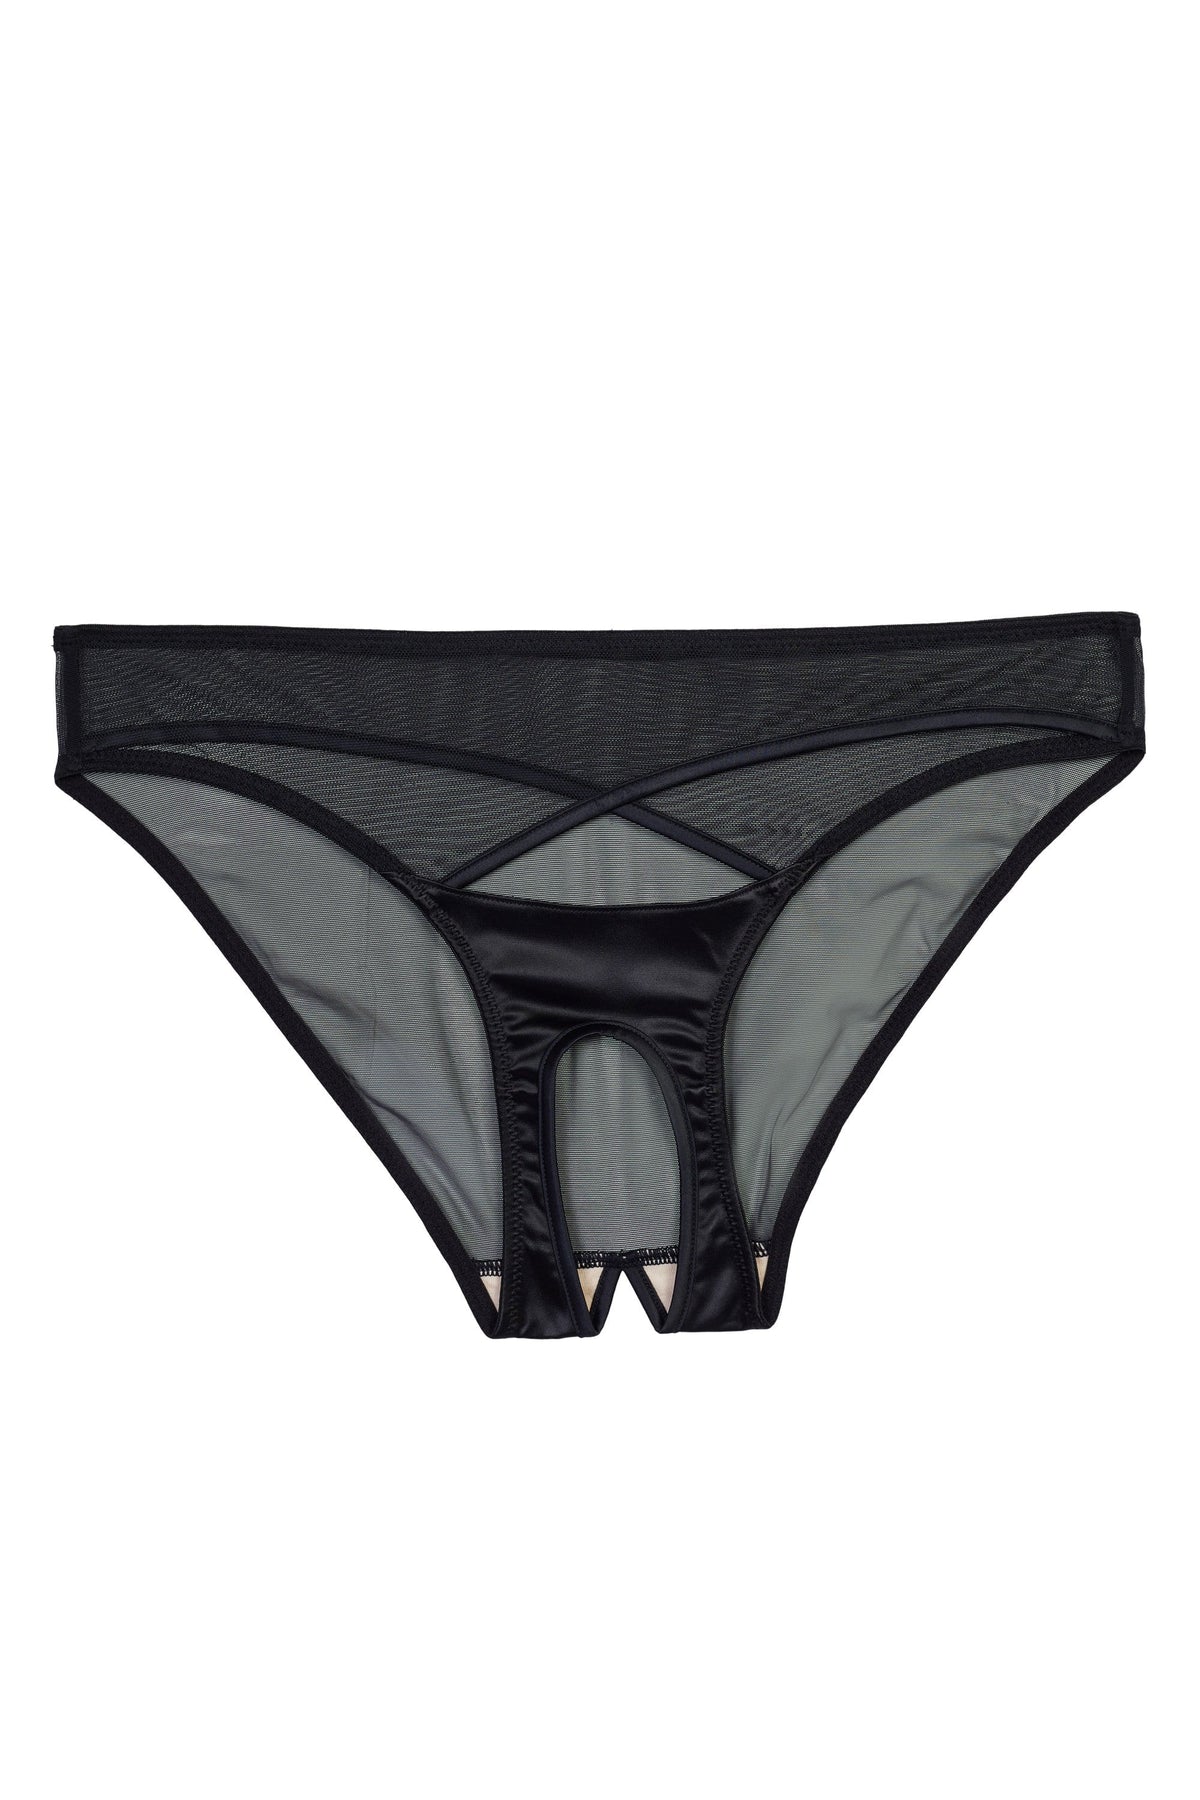 BY THE CASE THESE ARE ONLY $3.29 PER PIECE - Blank Black Boyshorts - T –  Dollar Panties